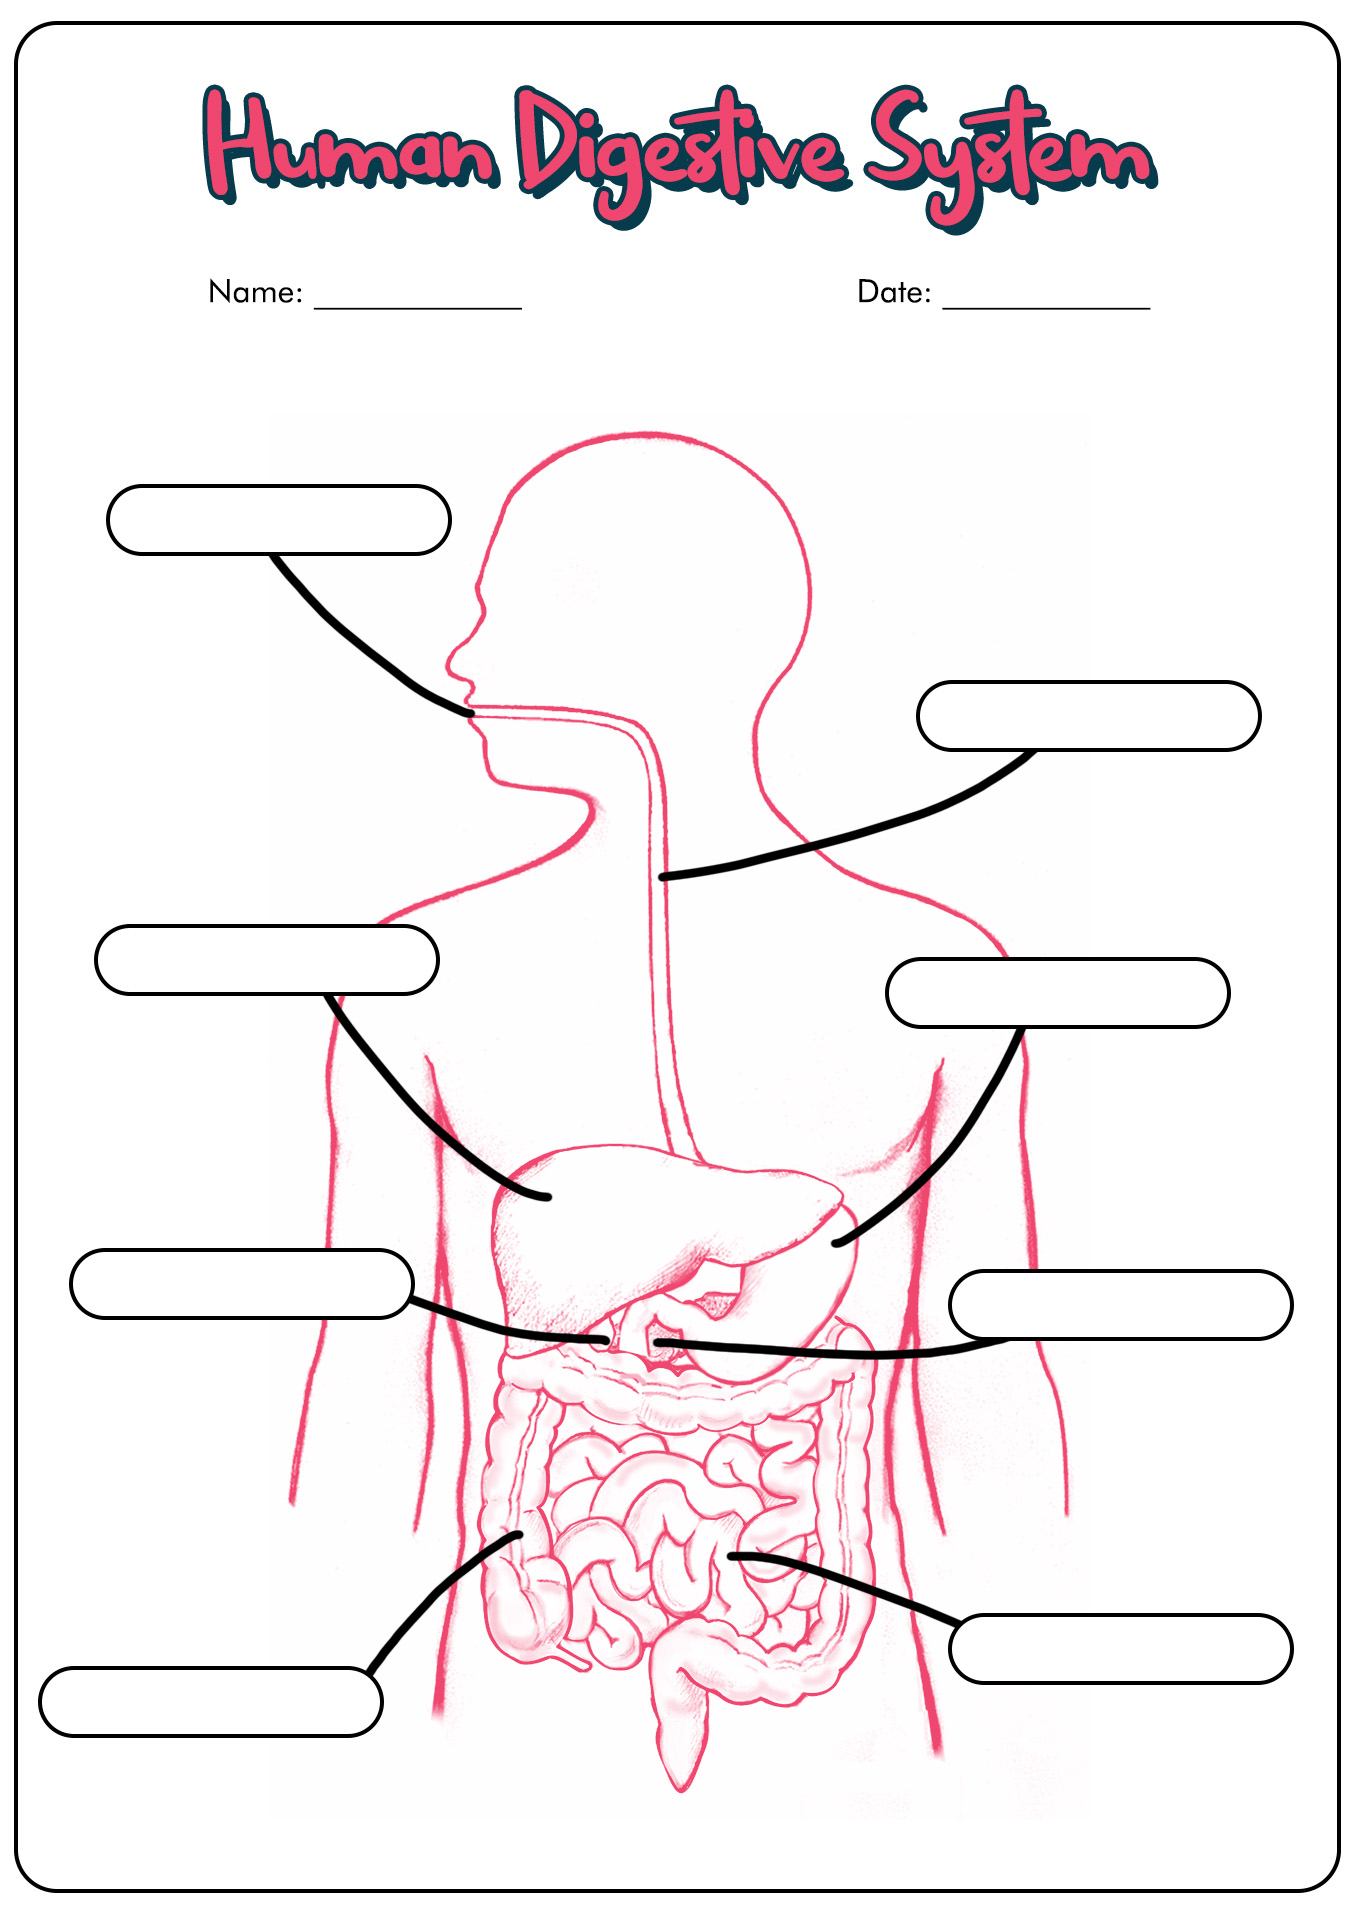 Human Digestive System Worksheet Answers